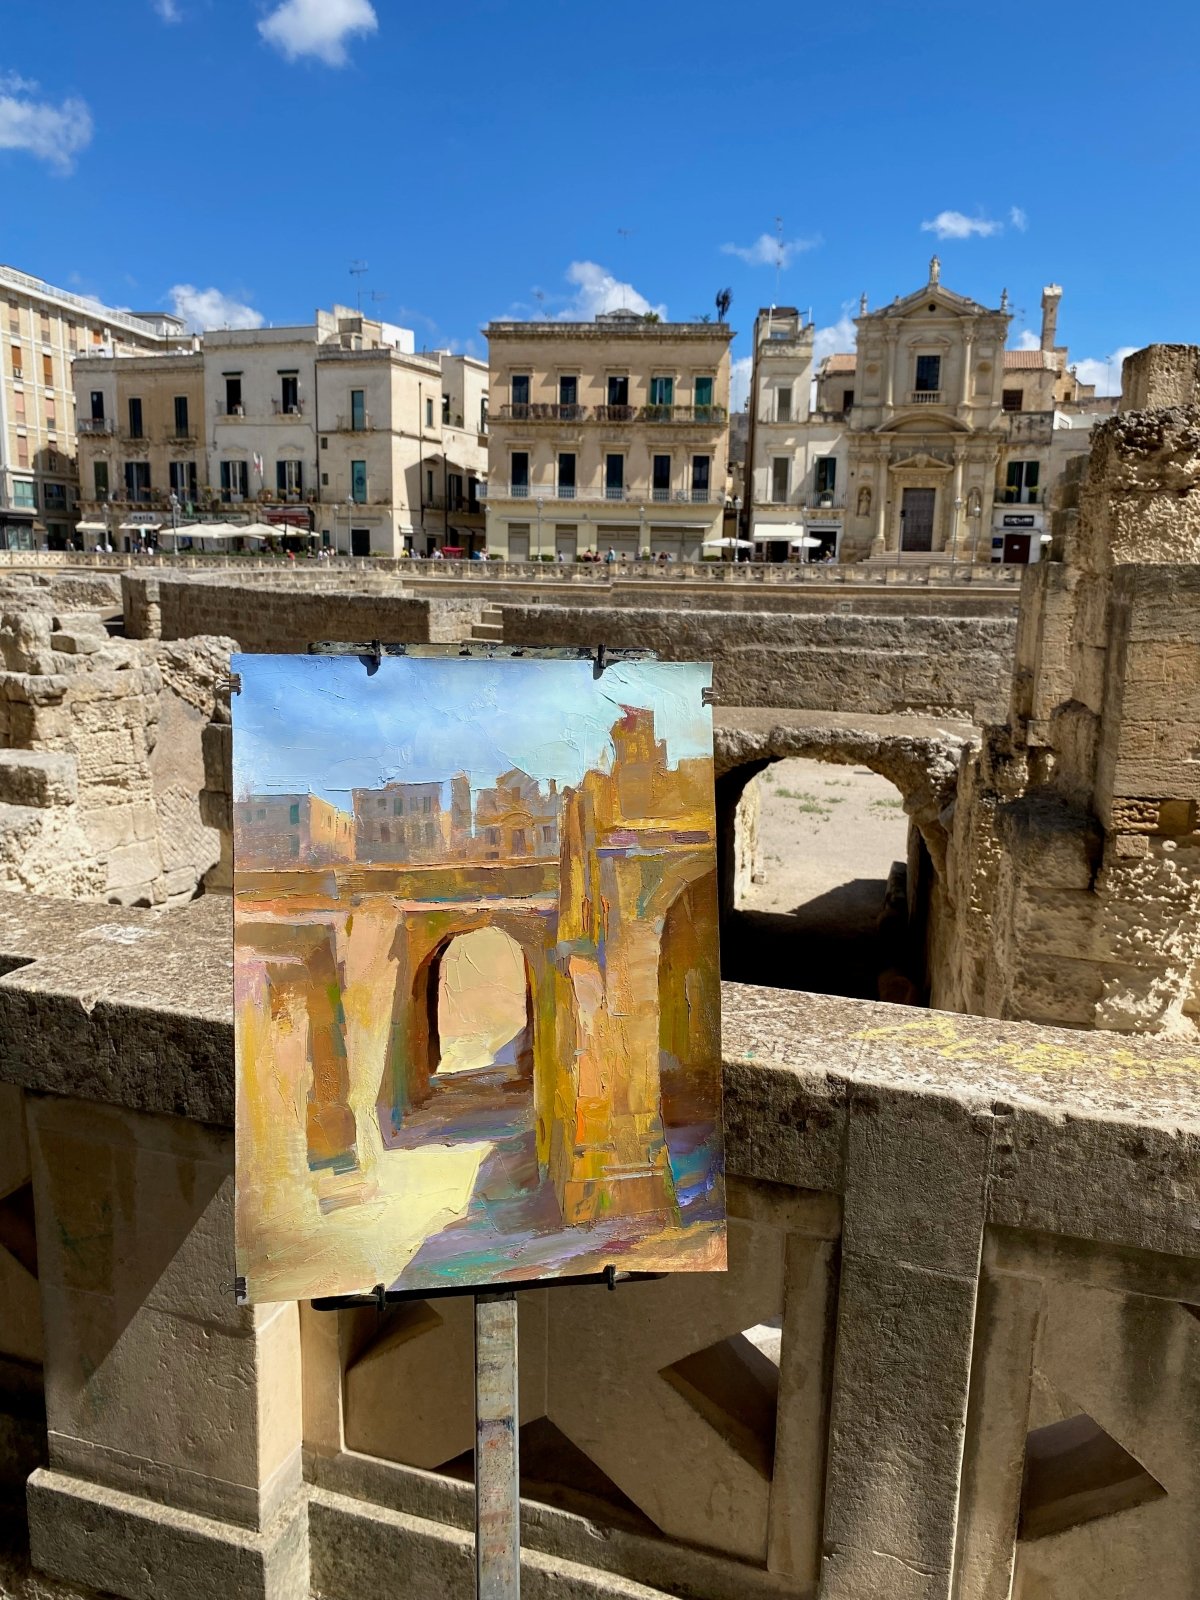 Lecce Amphitheater, Italy by Ignat Ignatov at LePrince Galleries